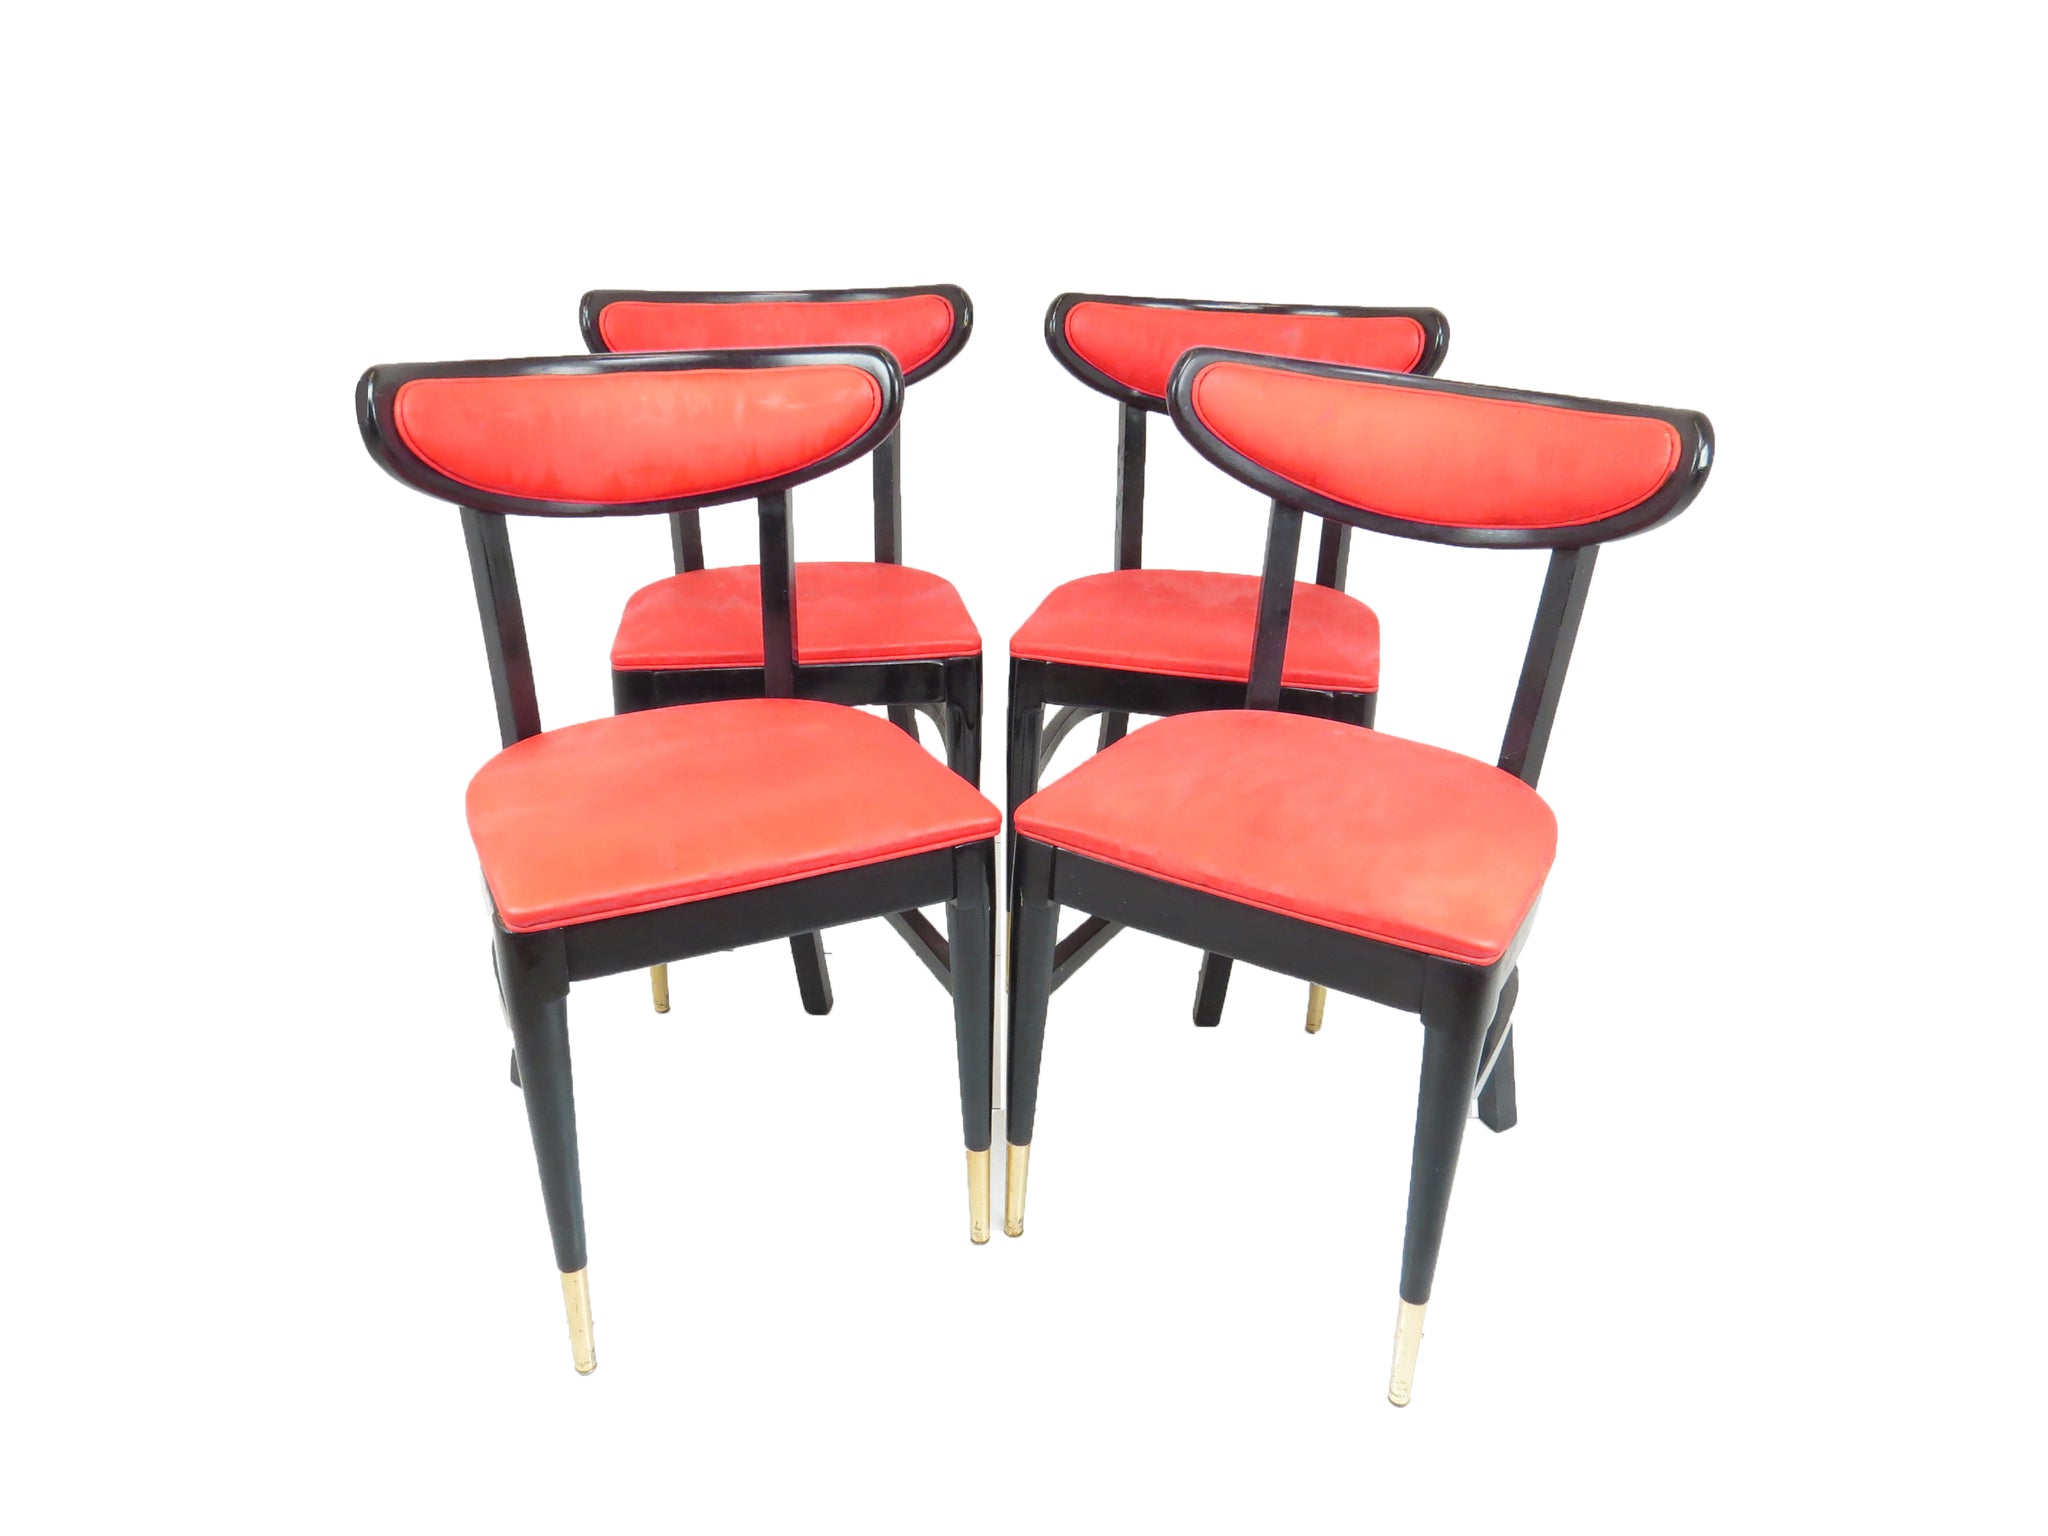 edgebrookhouse - 1950s Petite French Bistro Chairs by Bianco Mfg Co - Set of 4